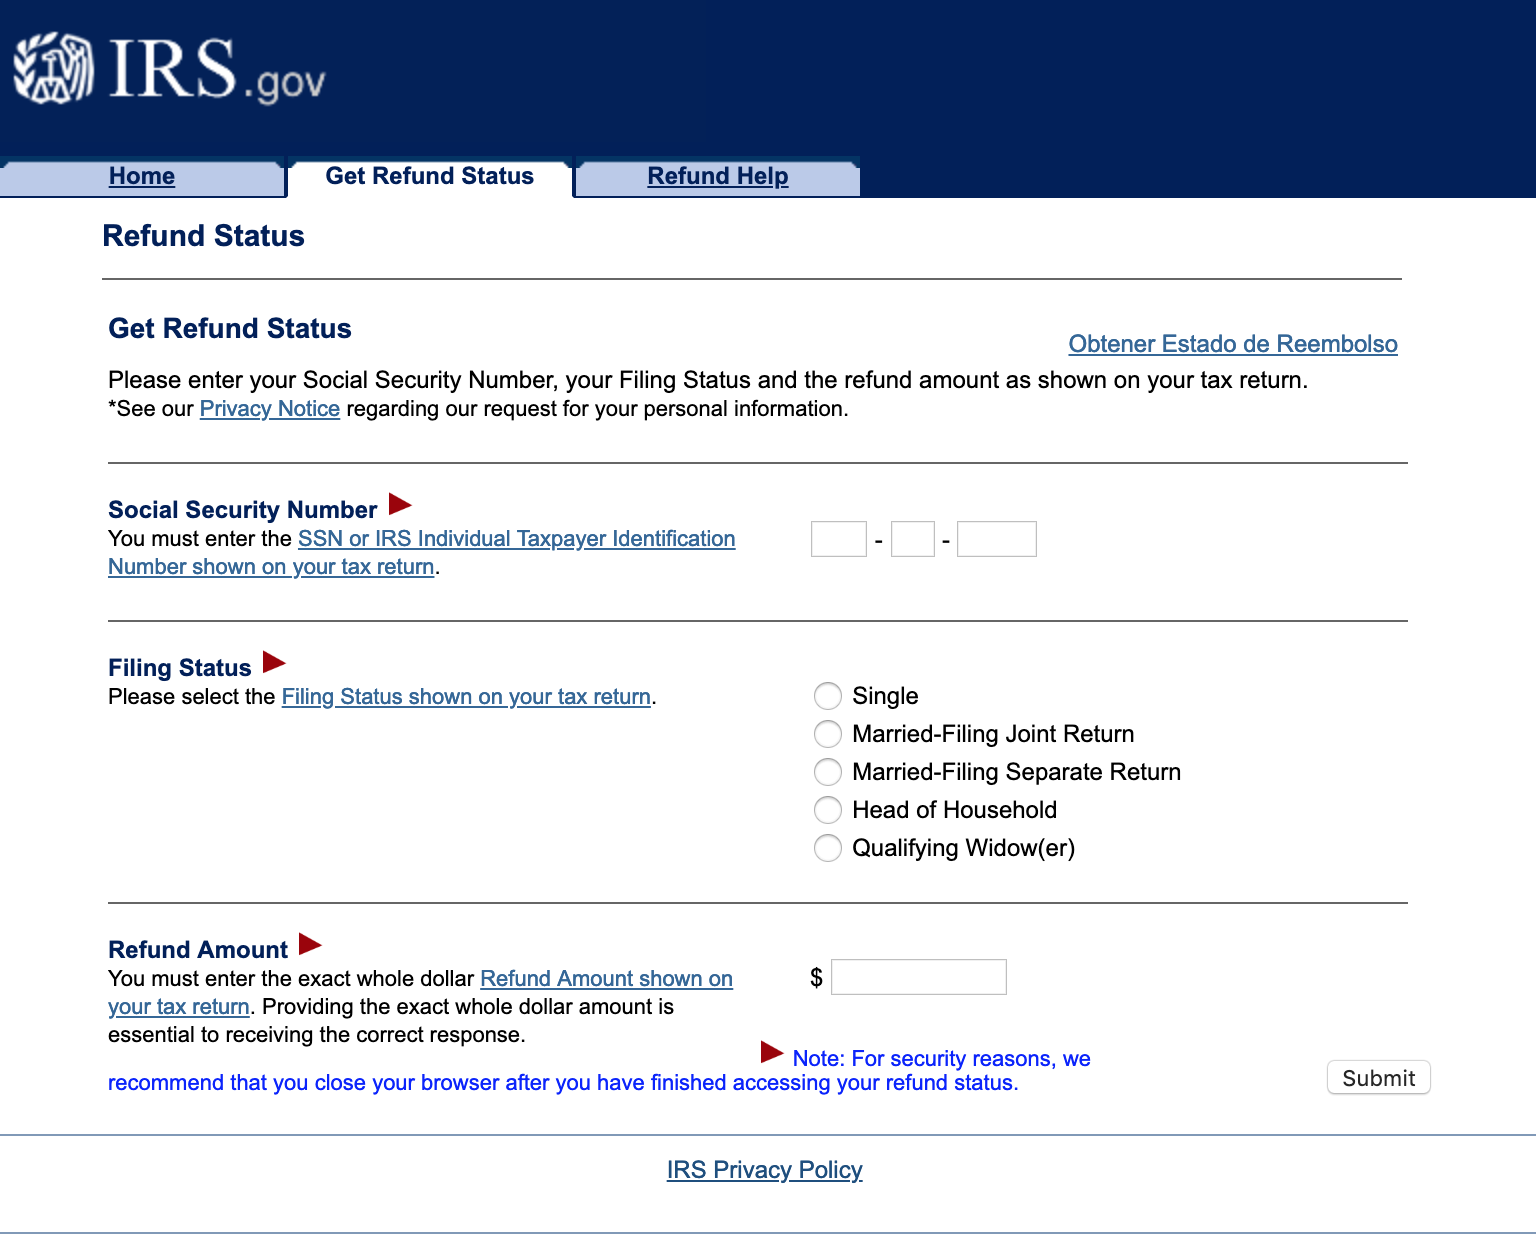 How to Check Your IRS Refund Status in 5 Minutes